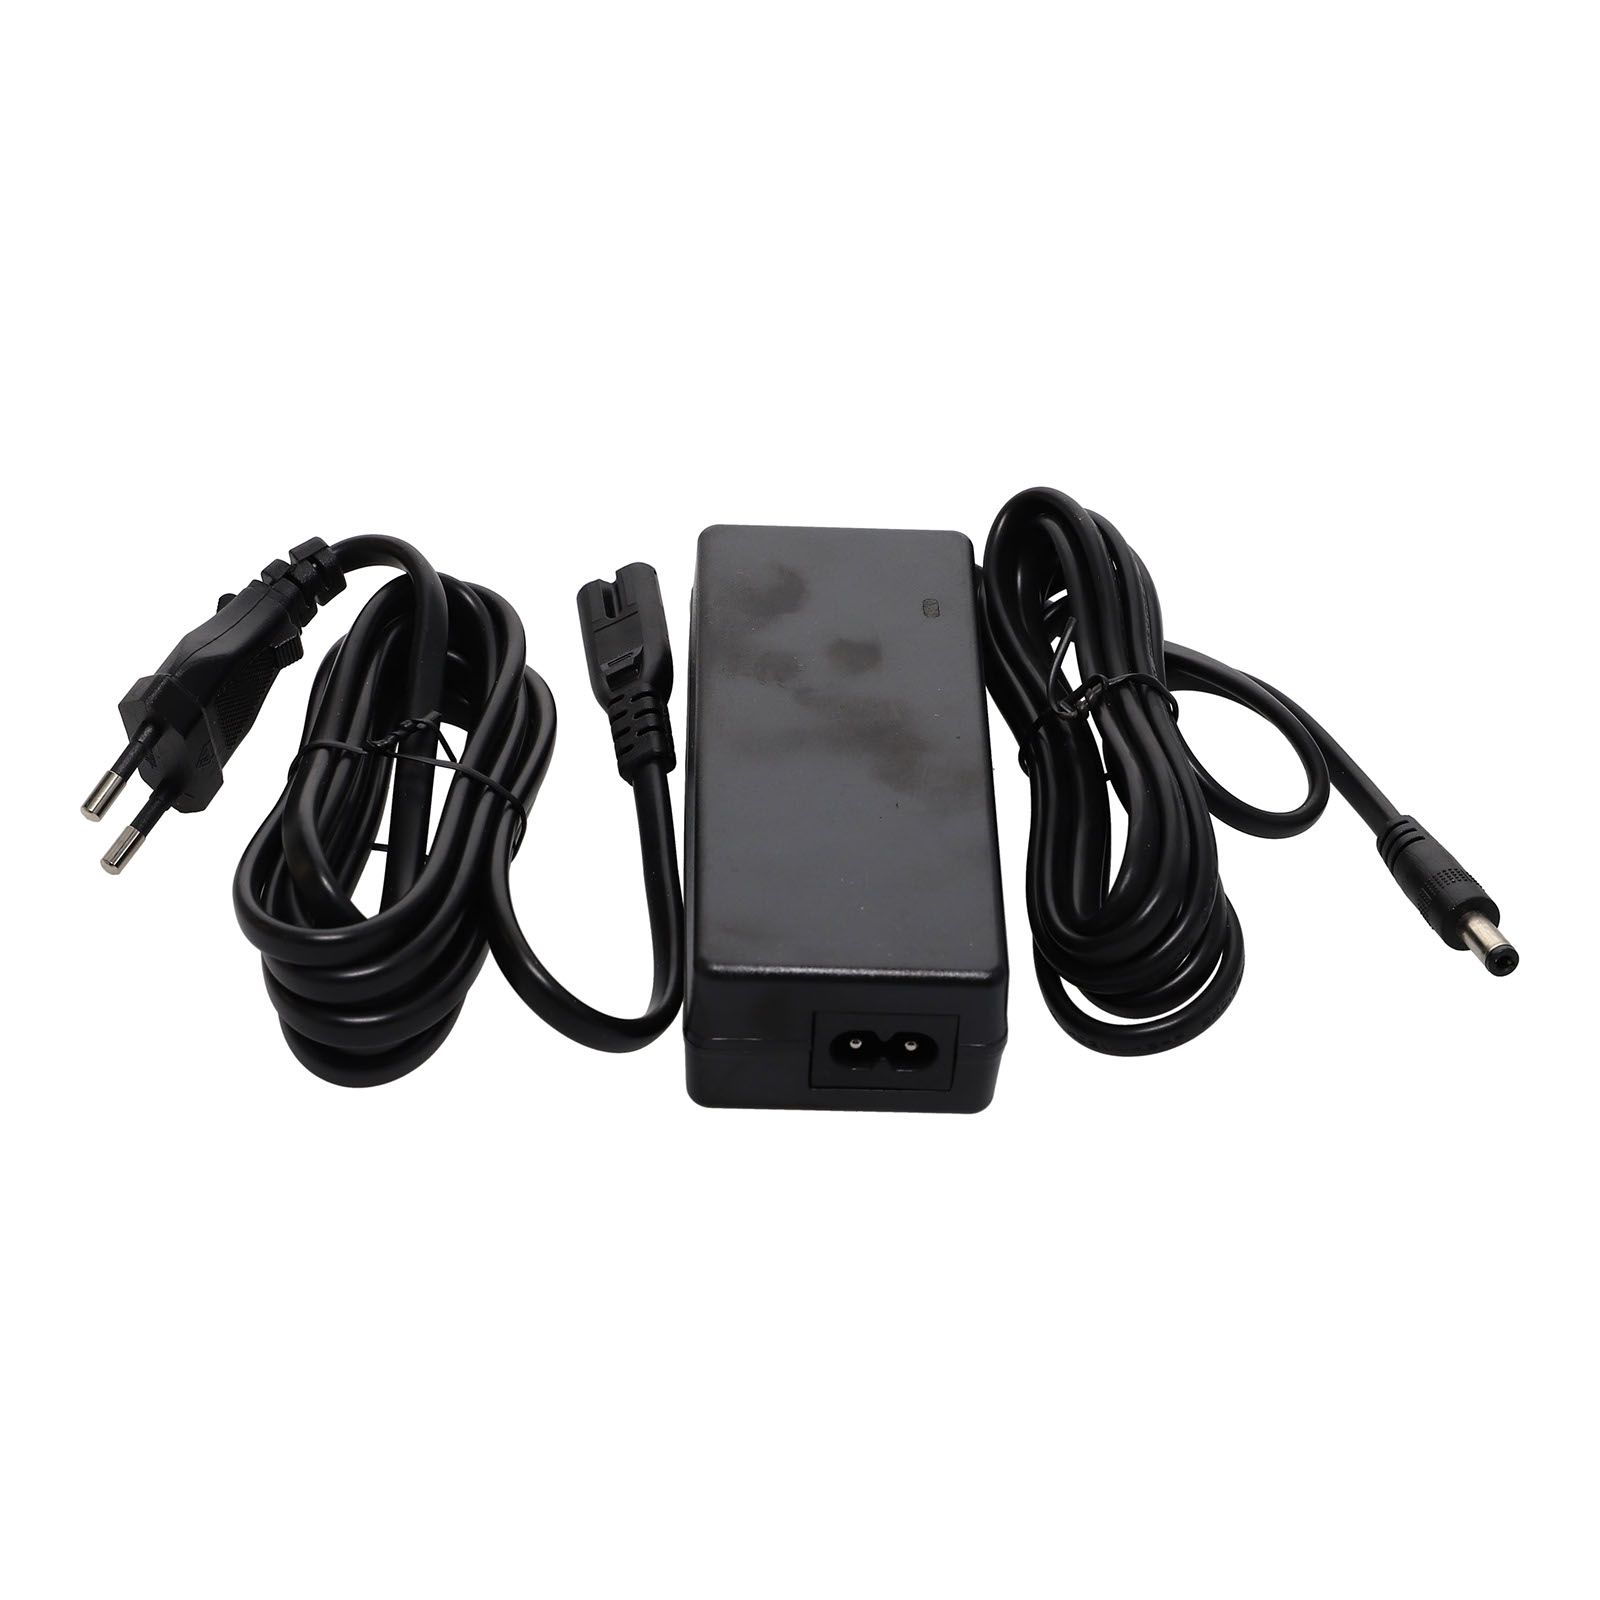 CHARGER FOR ULTRACAPACITOR JUMP STARTERS foto do produto